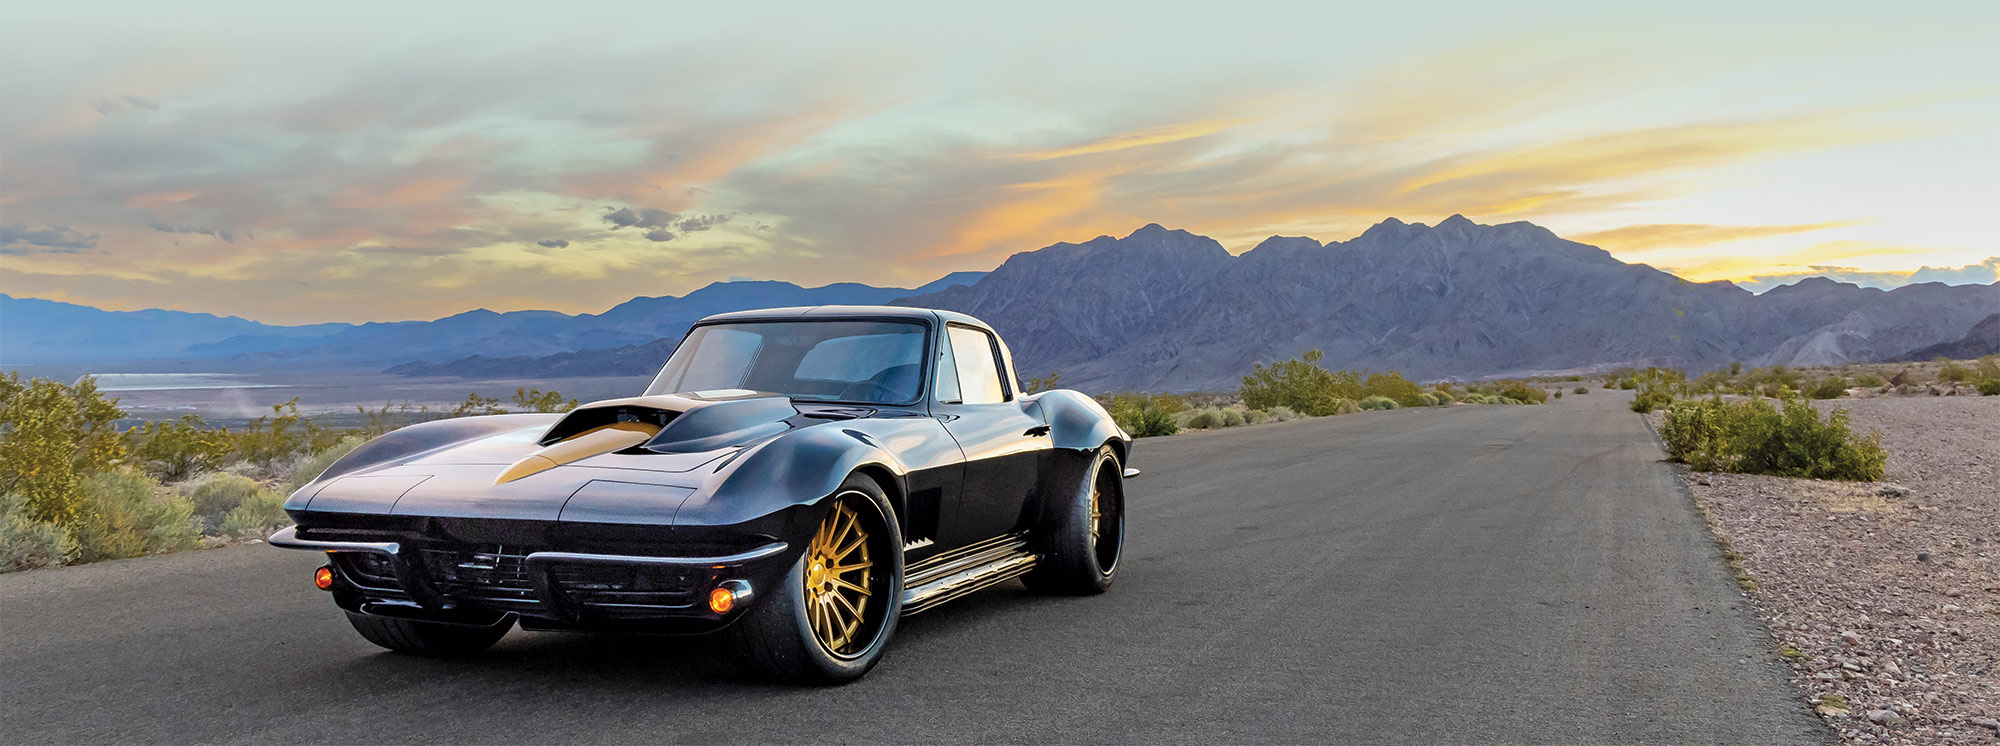 black '67 corvette with yellow accents